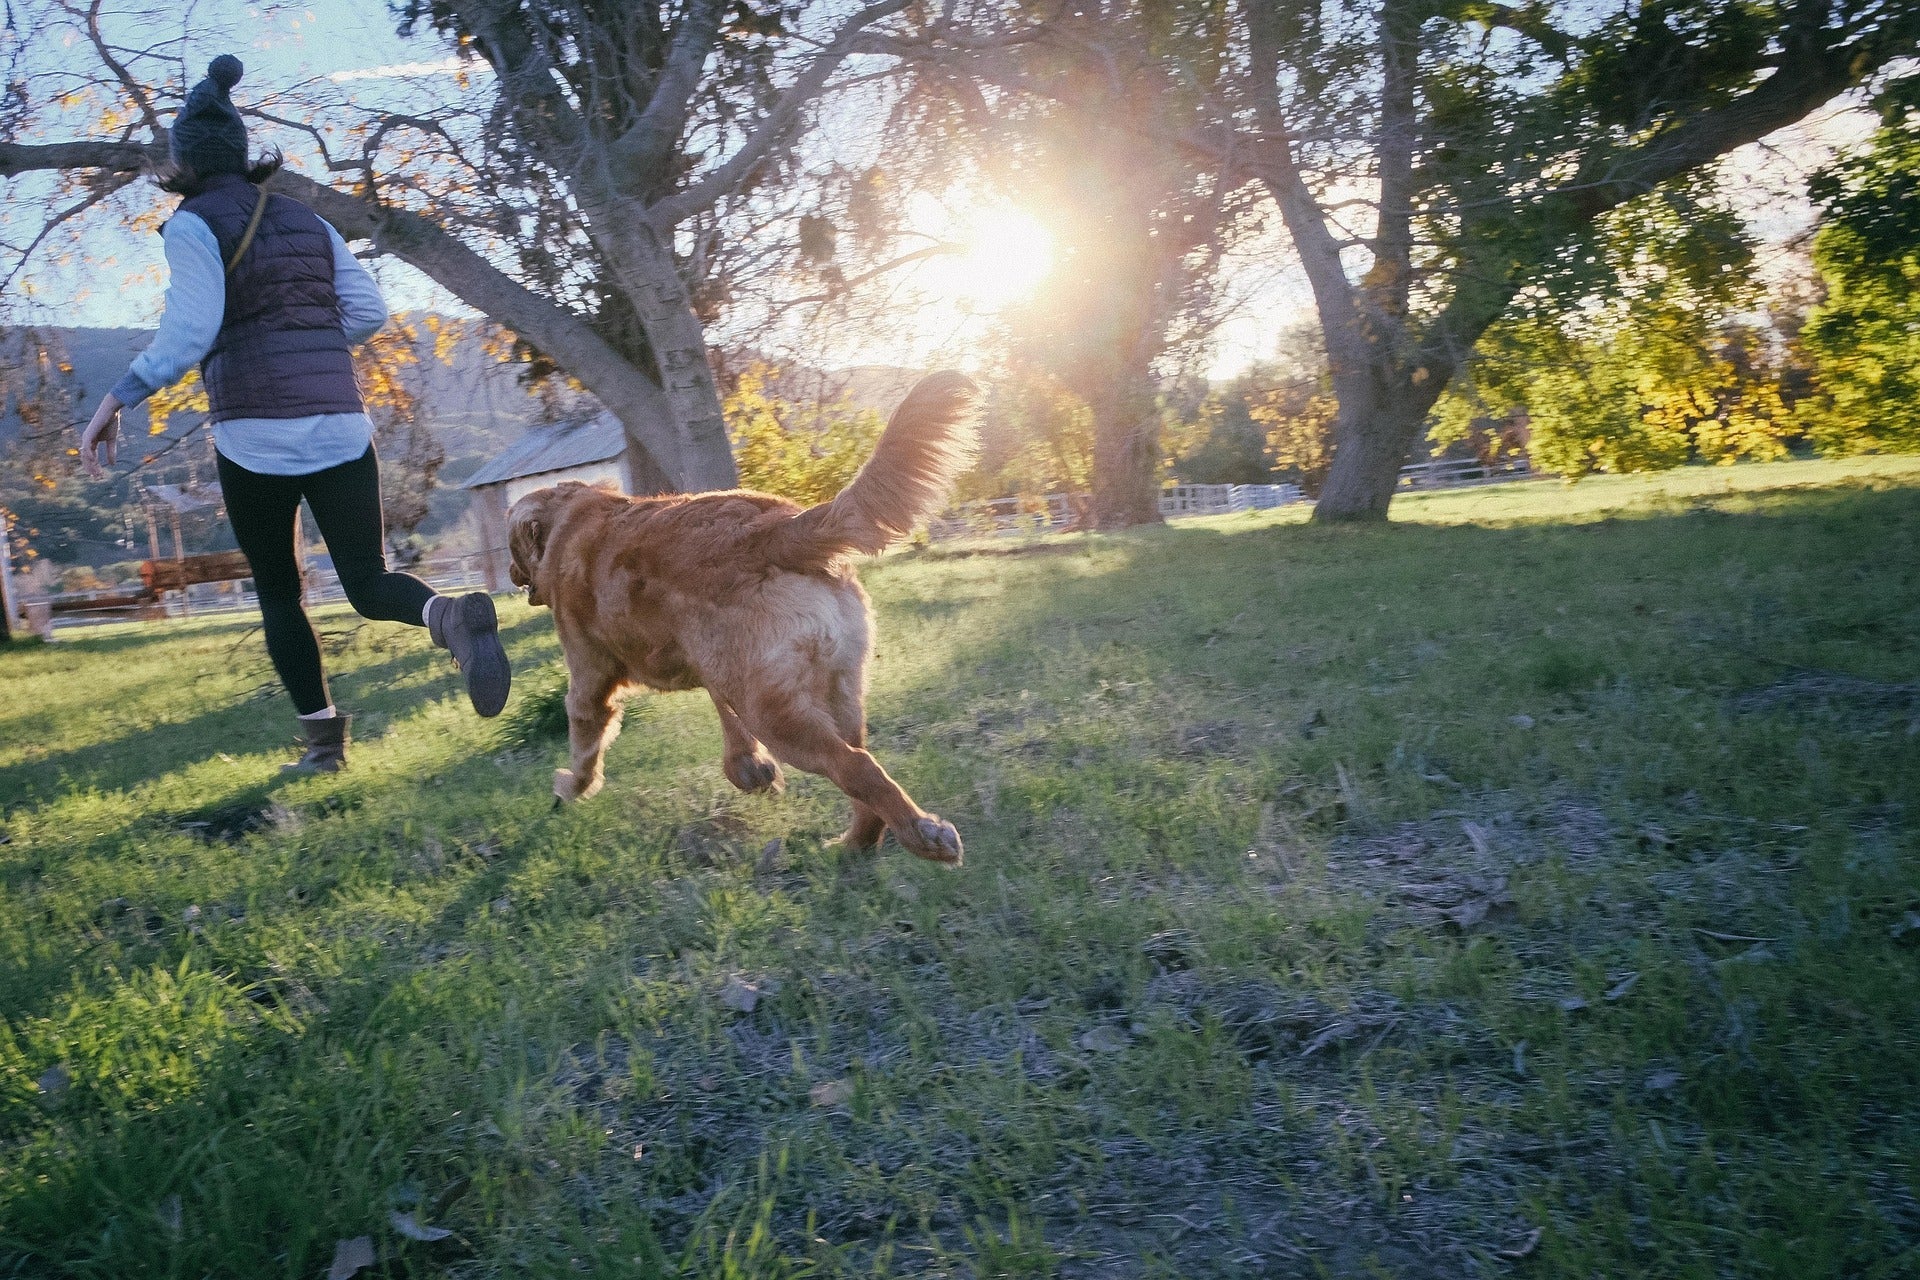 Dog-Friendly Activities to Enjoy with Your Furry Friend - KindTail